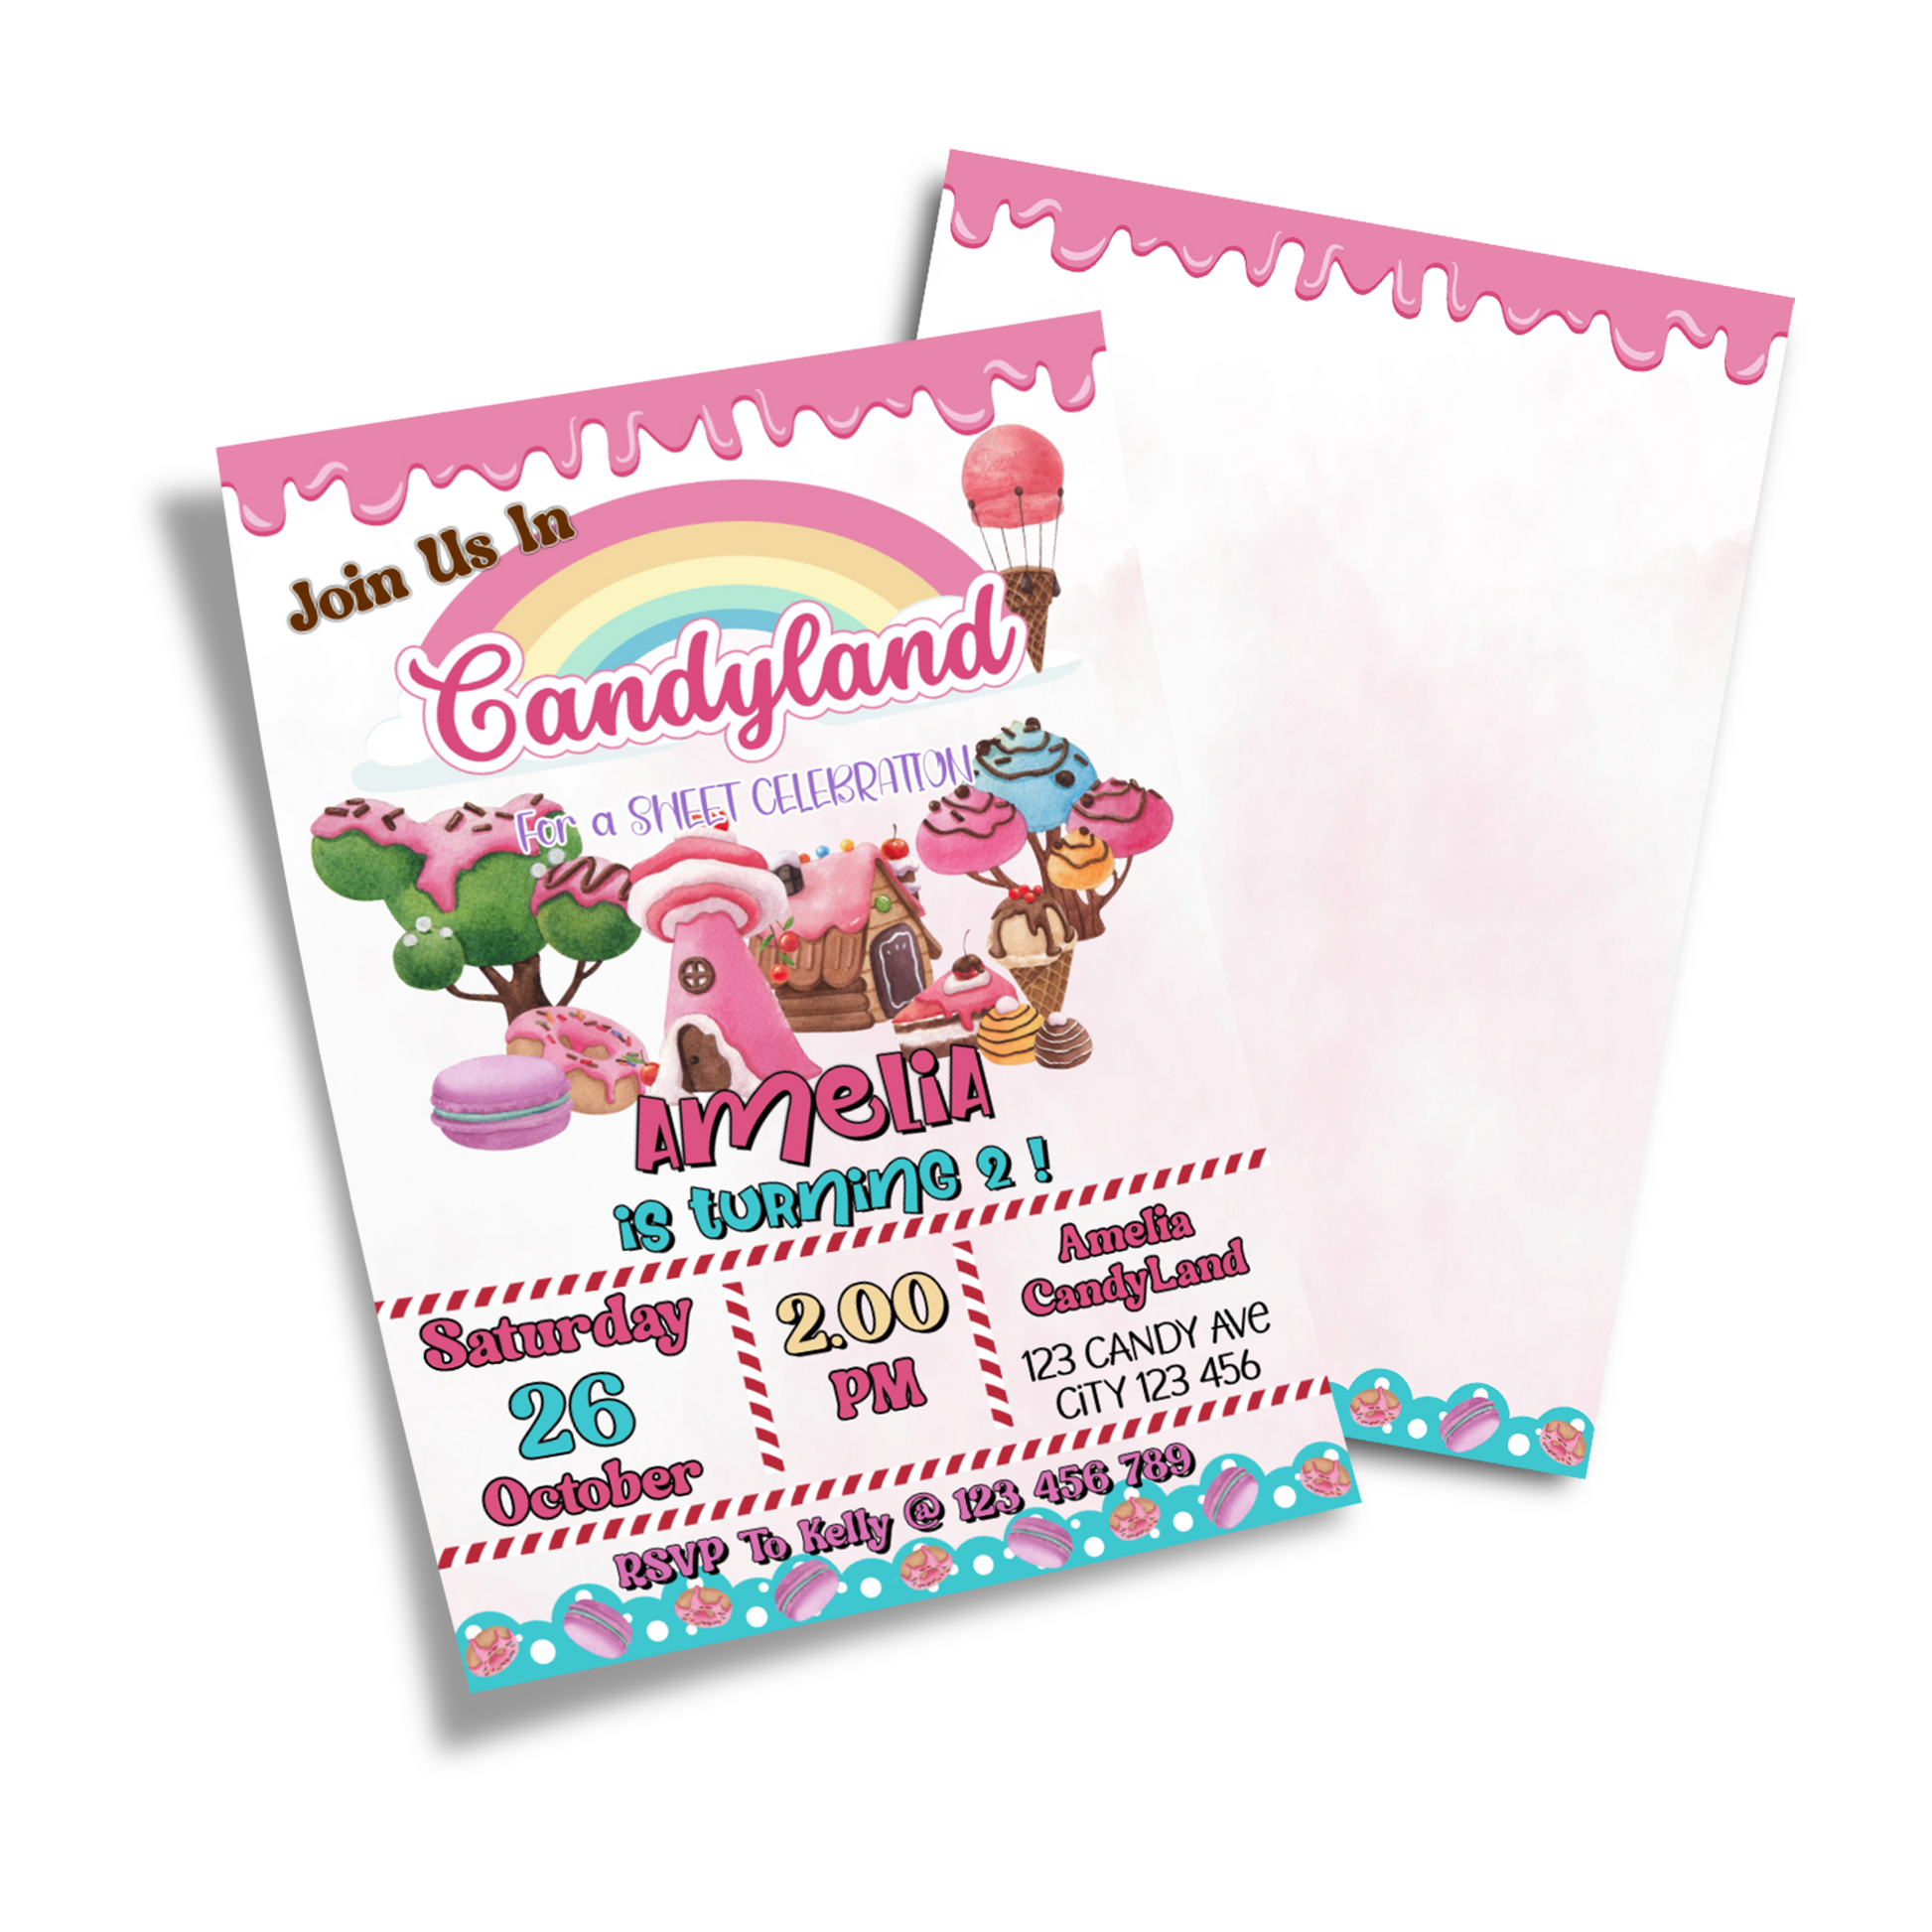 Personalized birthday card invitations with a Candy Land theme